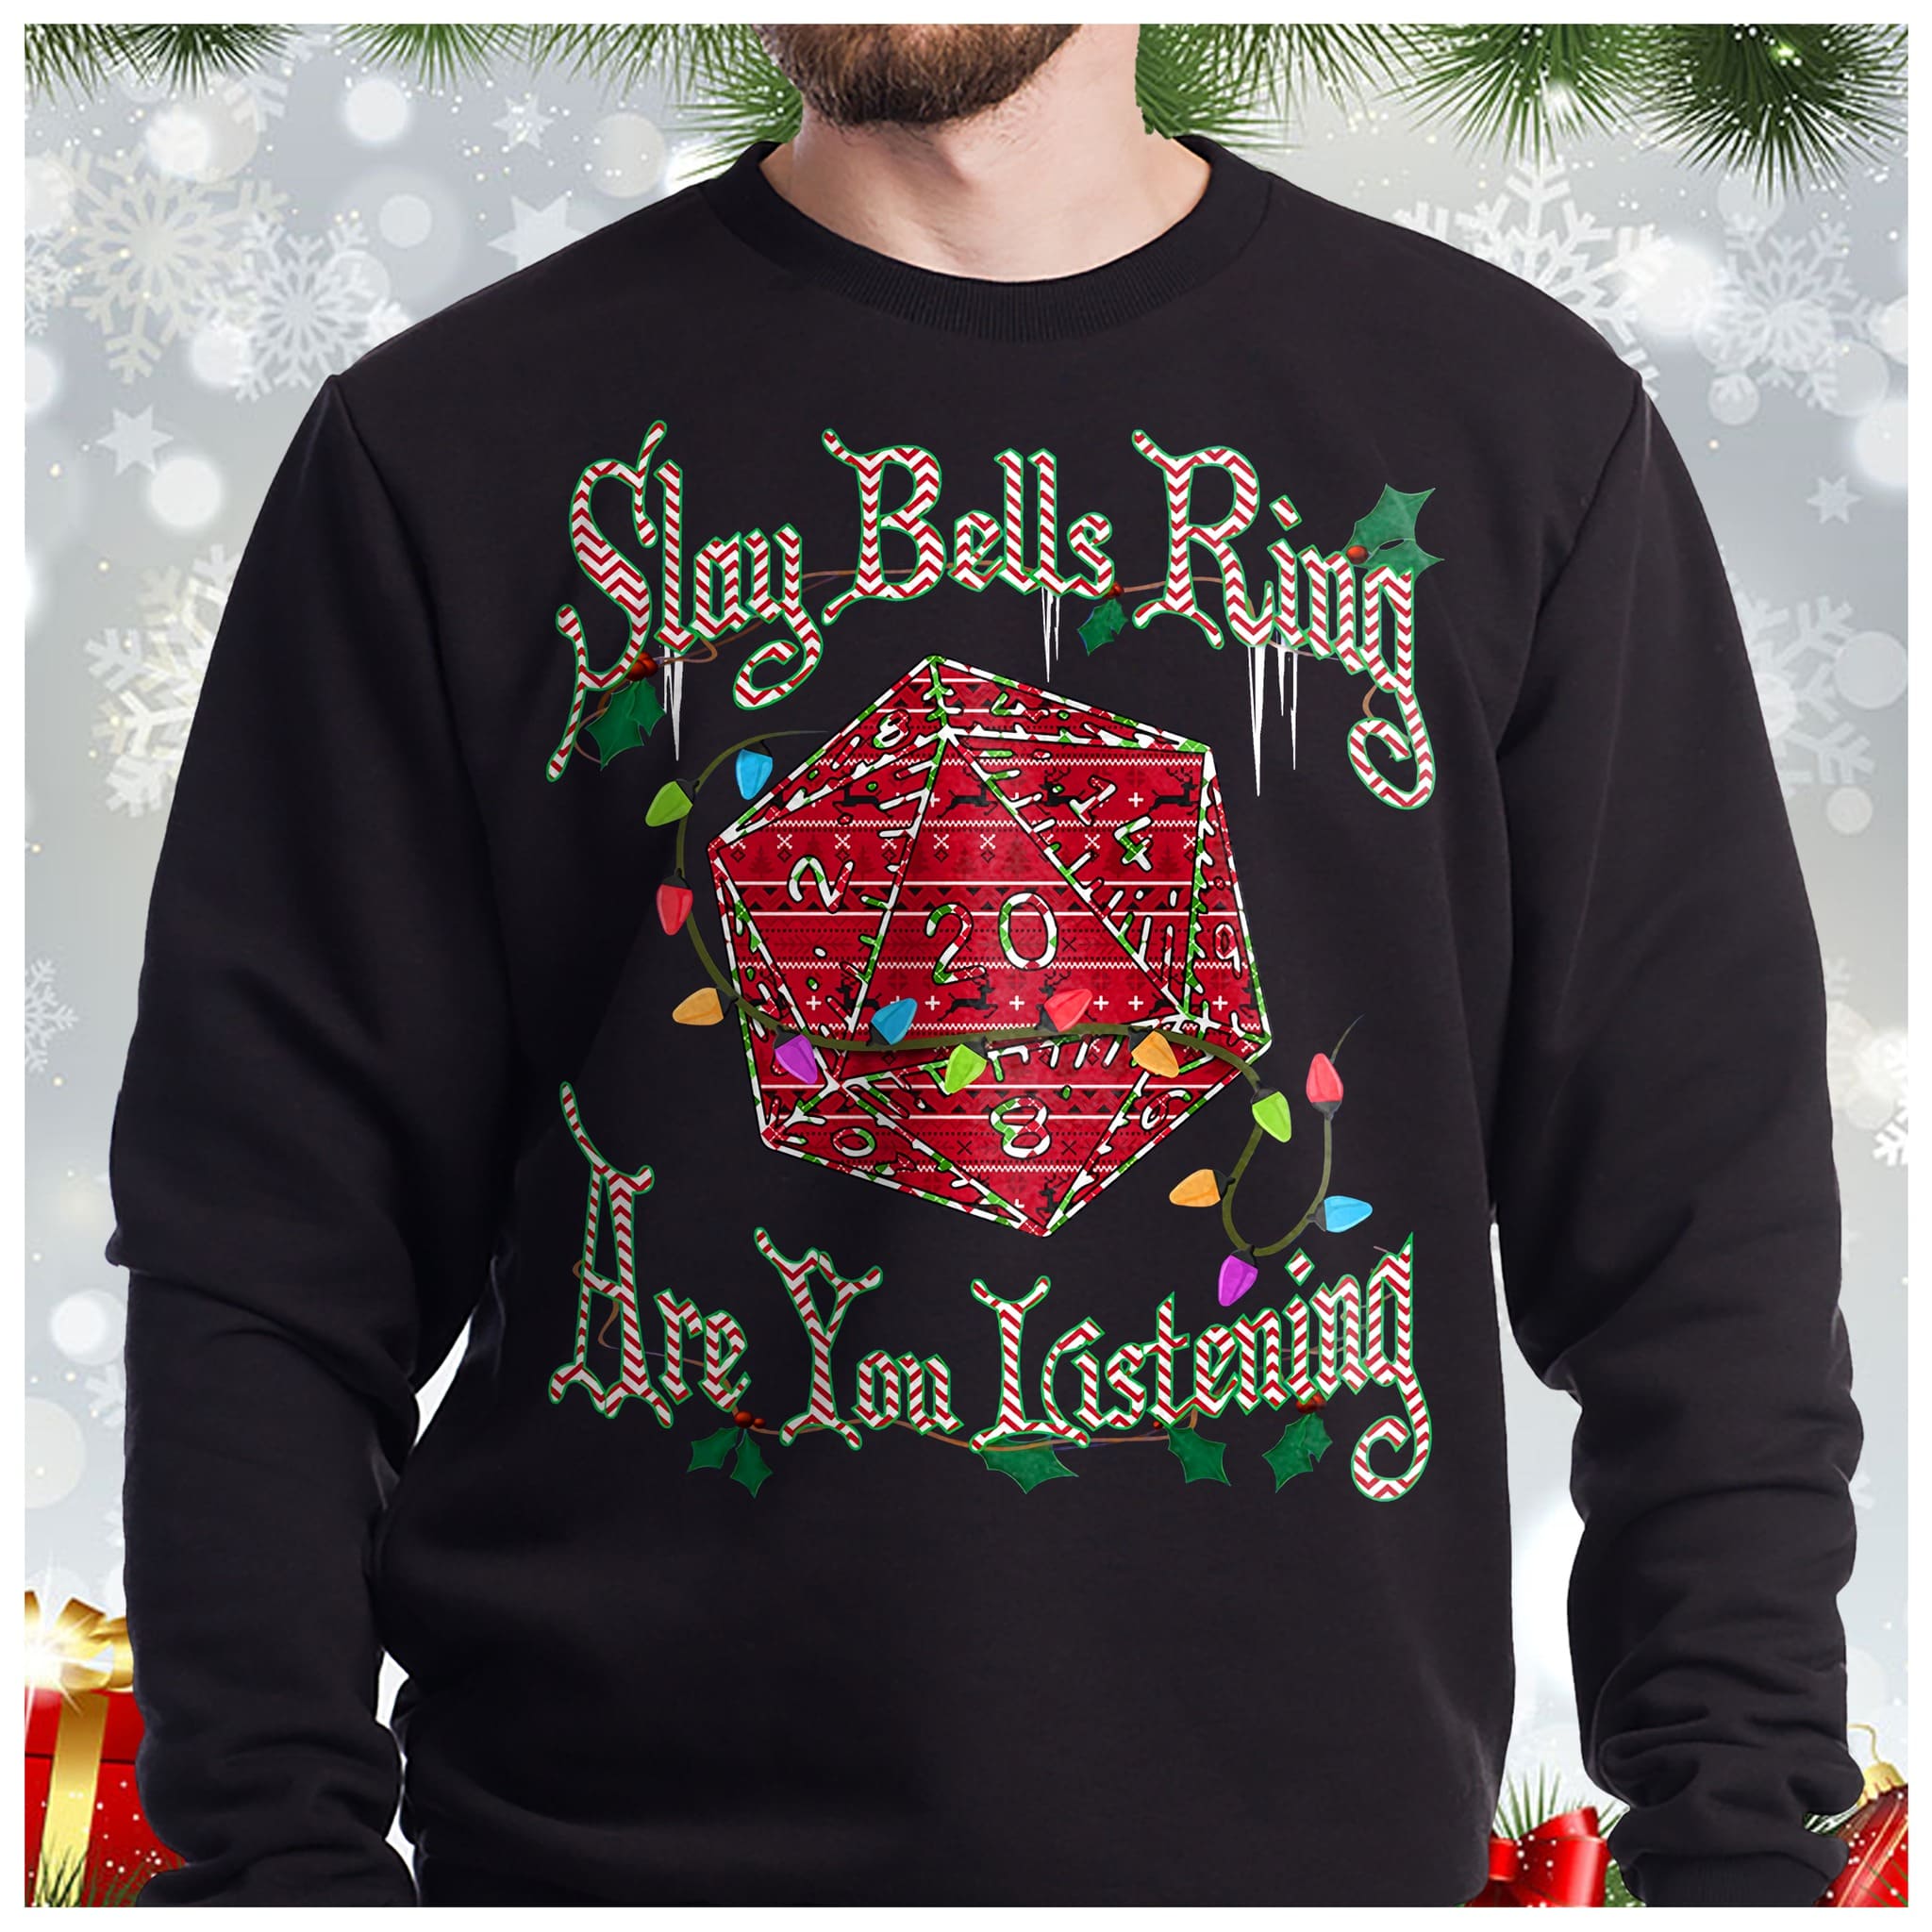 Slay bells ring, are you lastening - Dungeons and Dragons, Christmas day dices